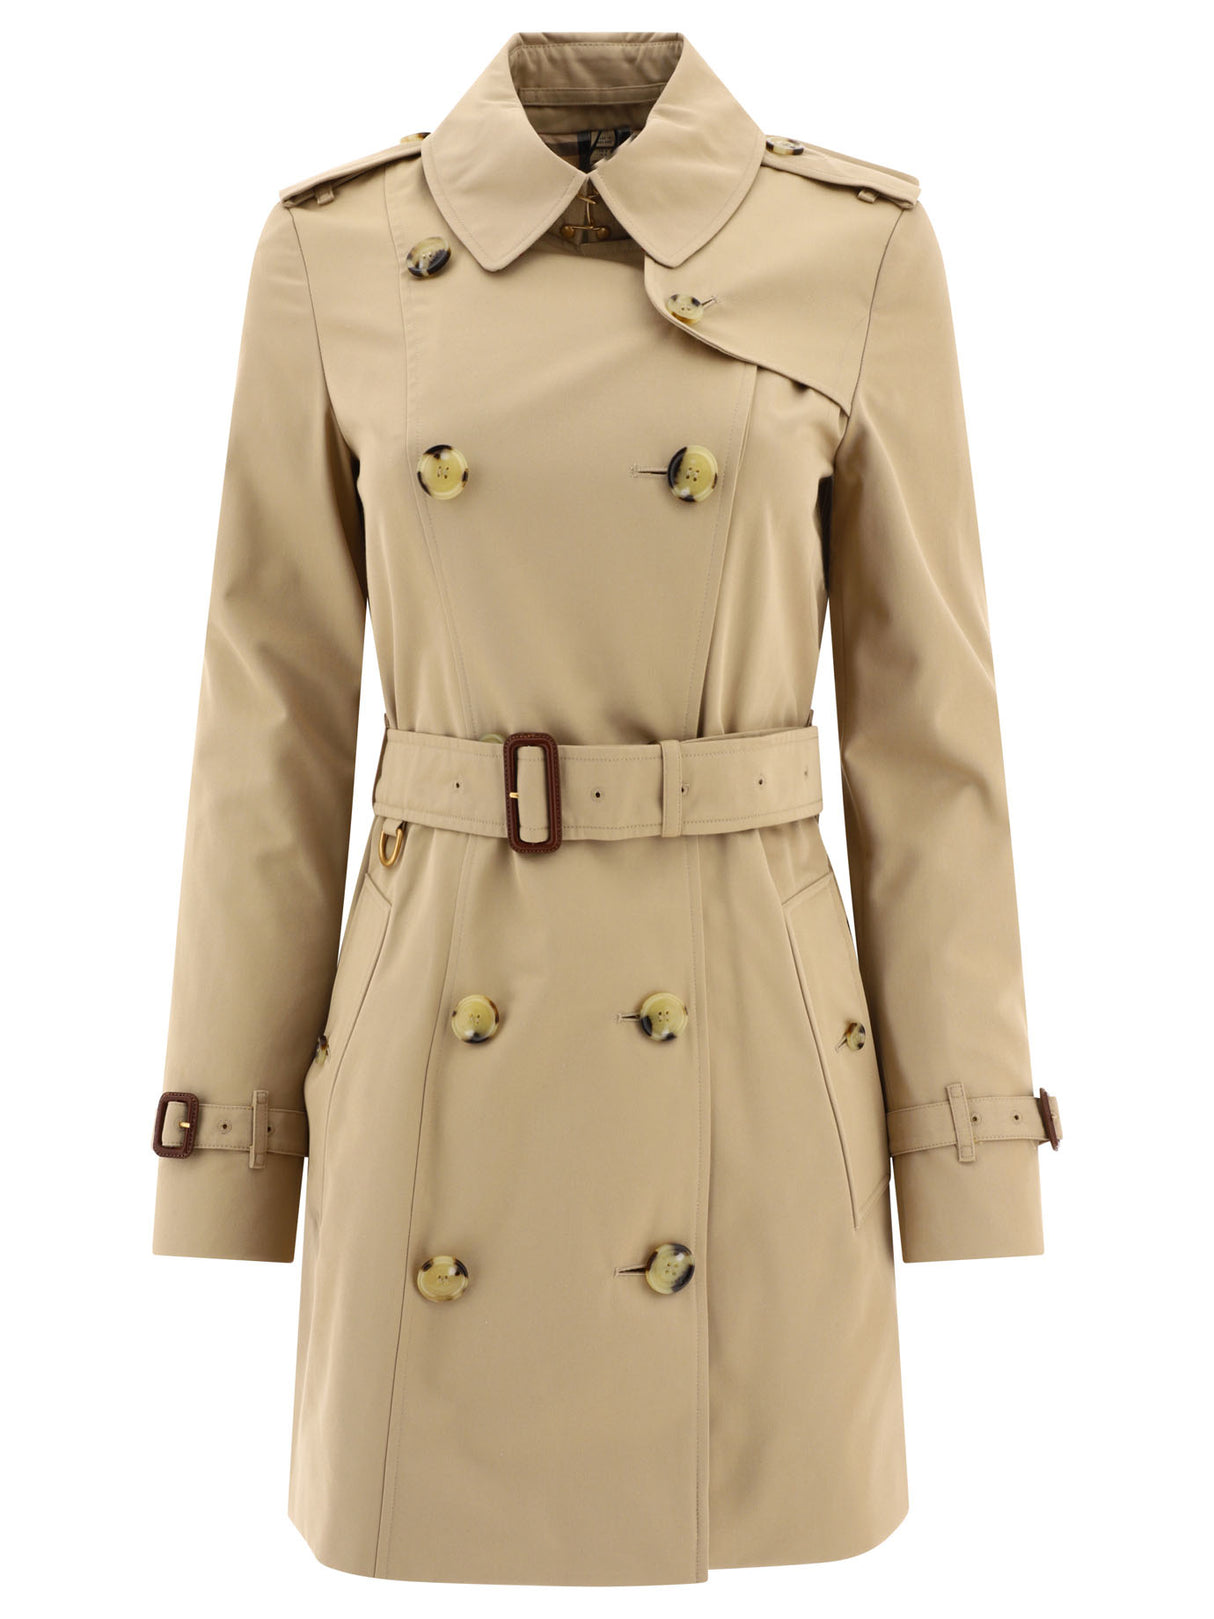 BURBERRY Beige Trenchcoat for Women - Regular Fit, Double-Breasted, Belted with Side Pockets